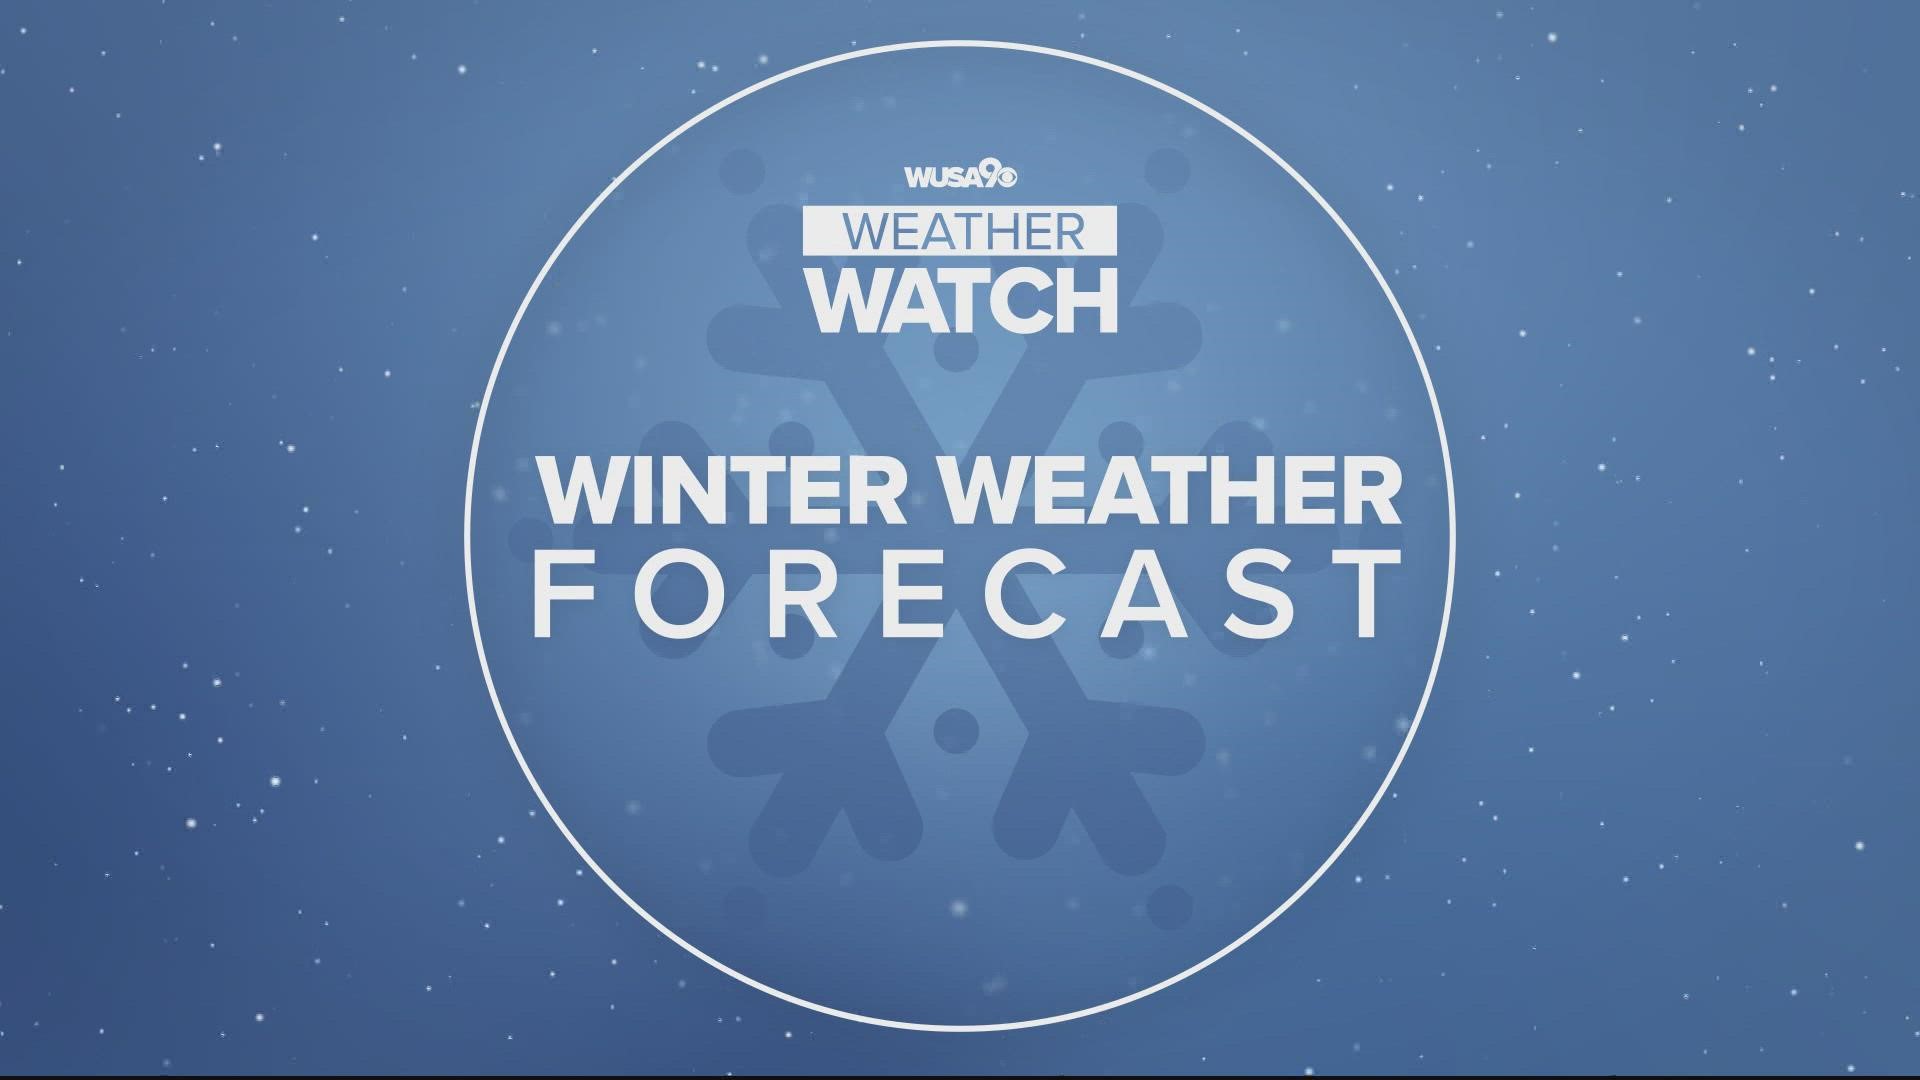 DC's most accurate forecast team is bringing you a look at the winter weather ahead.